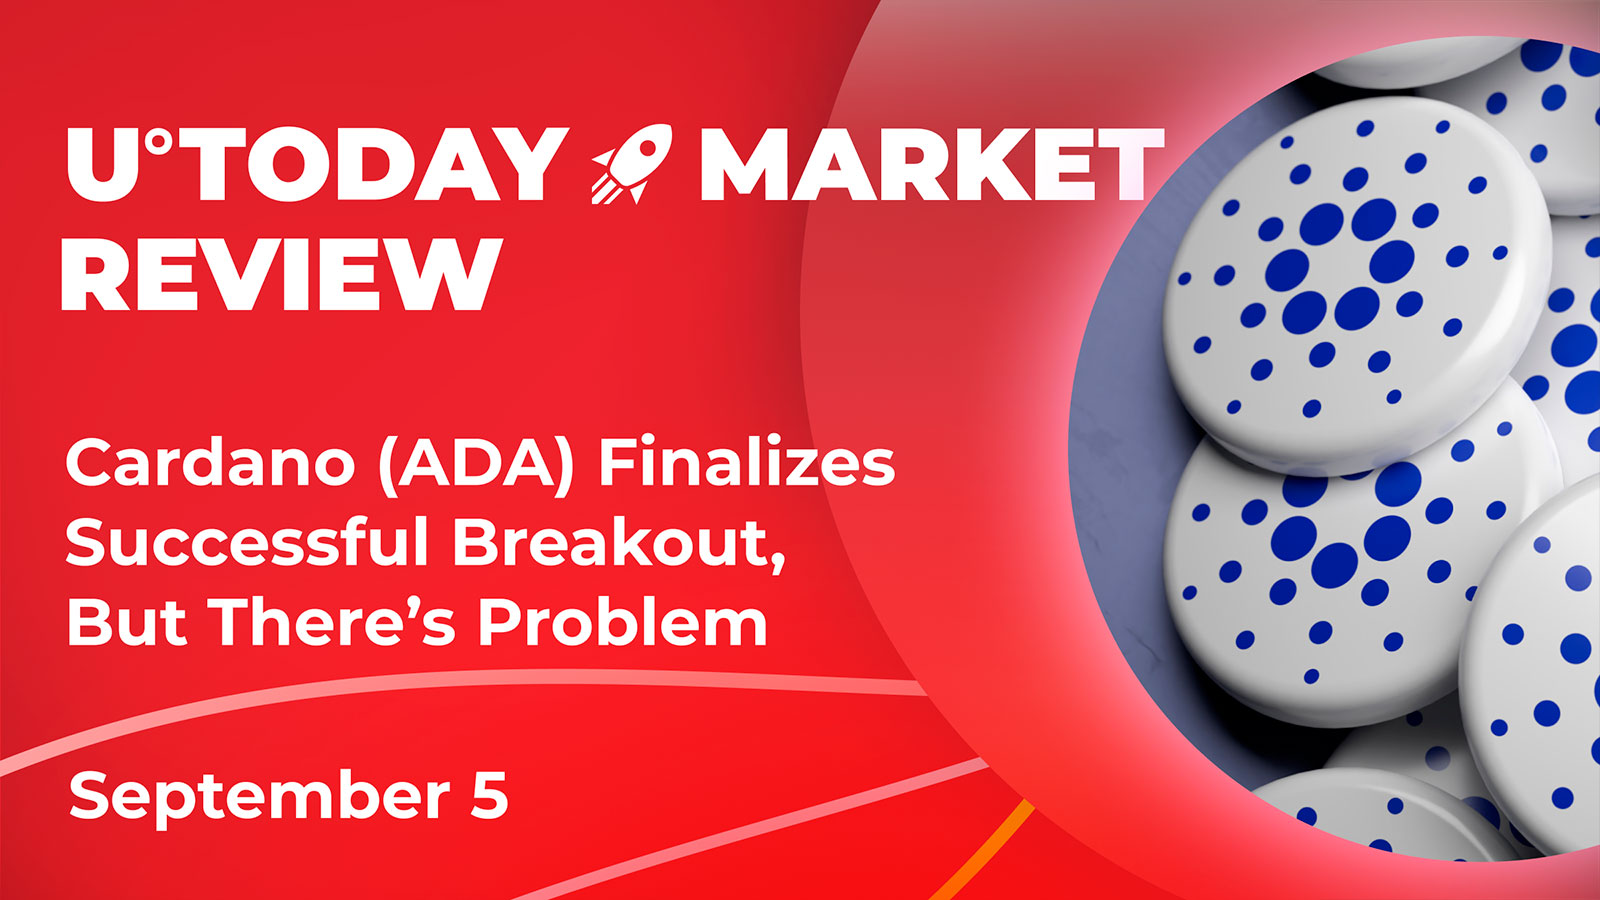 Cardano (ADA) Finalizes Successful Breakout, But There’s Problem: Crypto Market Review, September 5